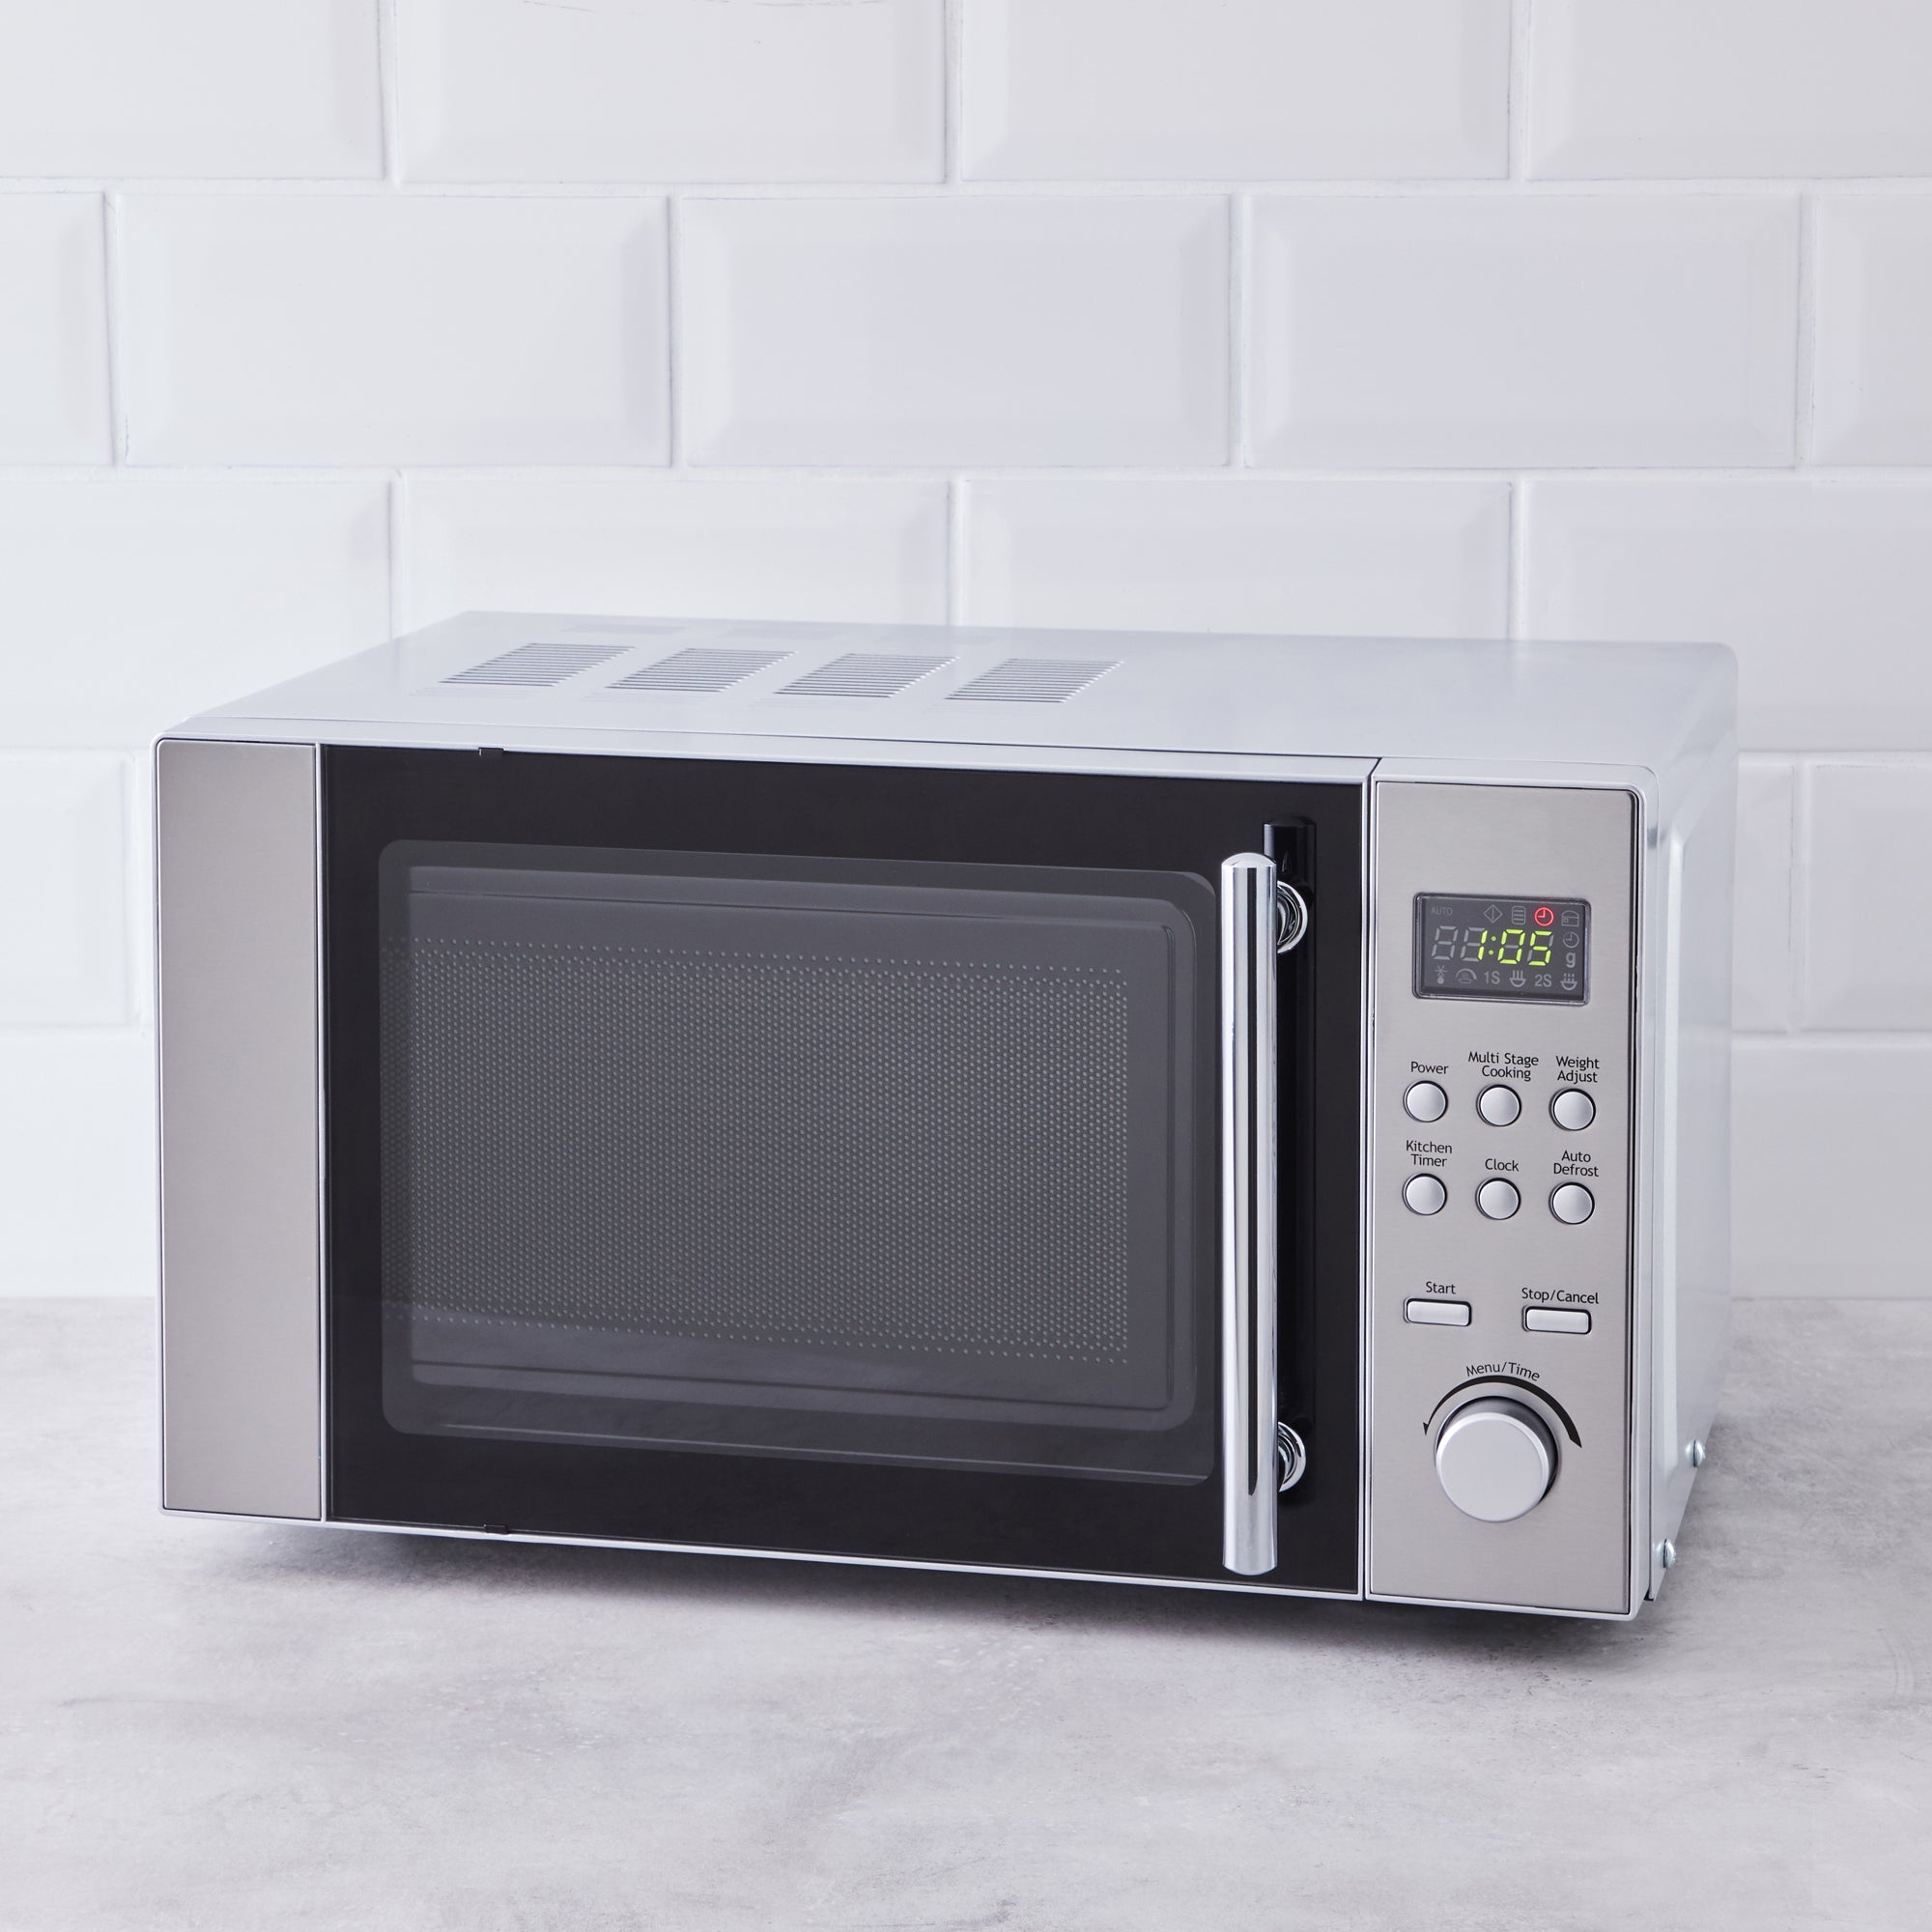 Stainless Steel 20L 700W Microwave